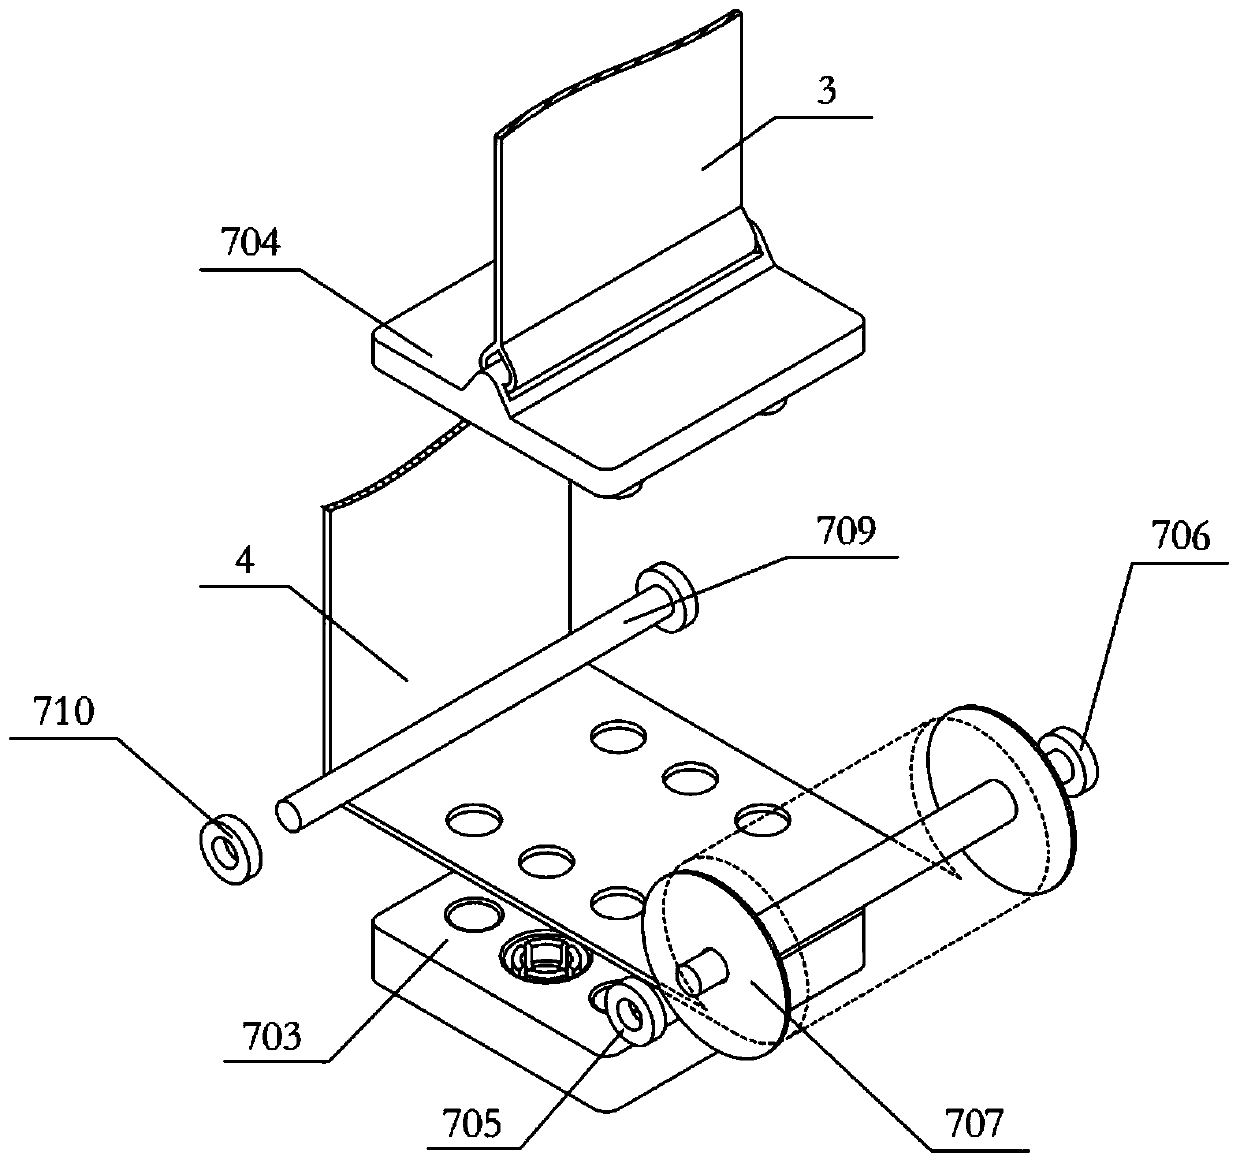 Automatic control device used in expanding process of air bag restraint system